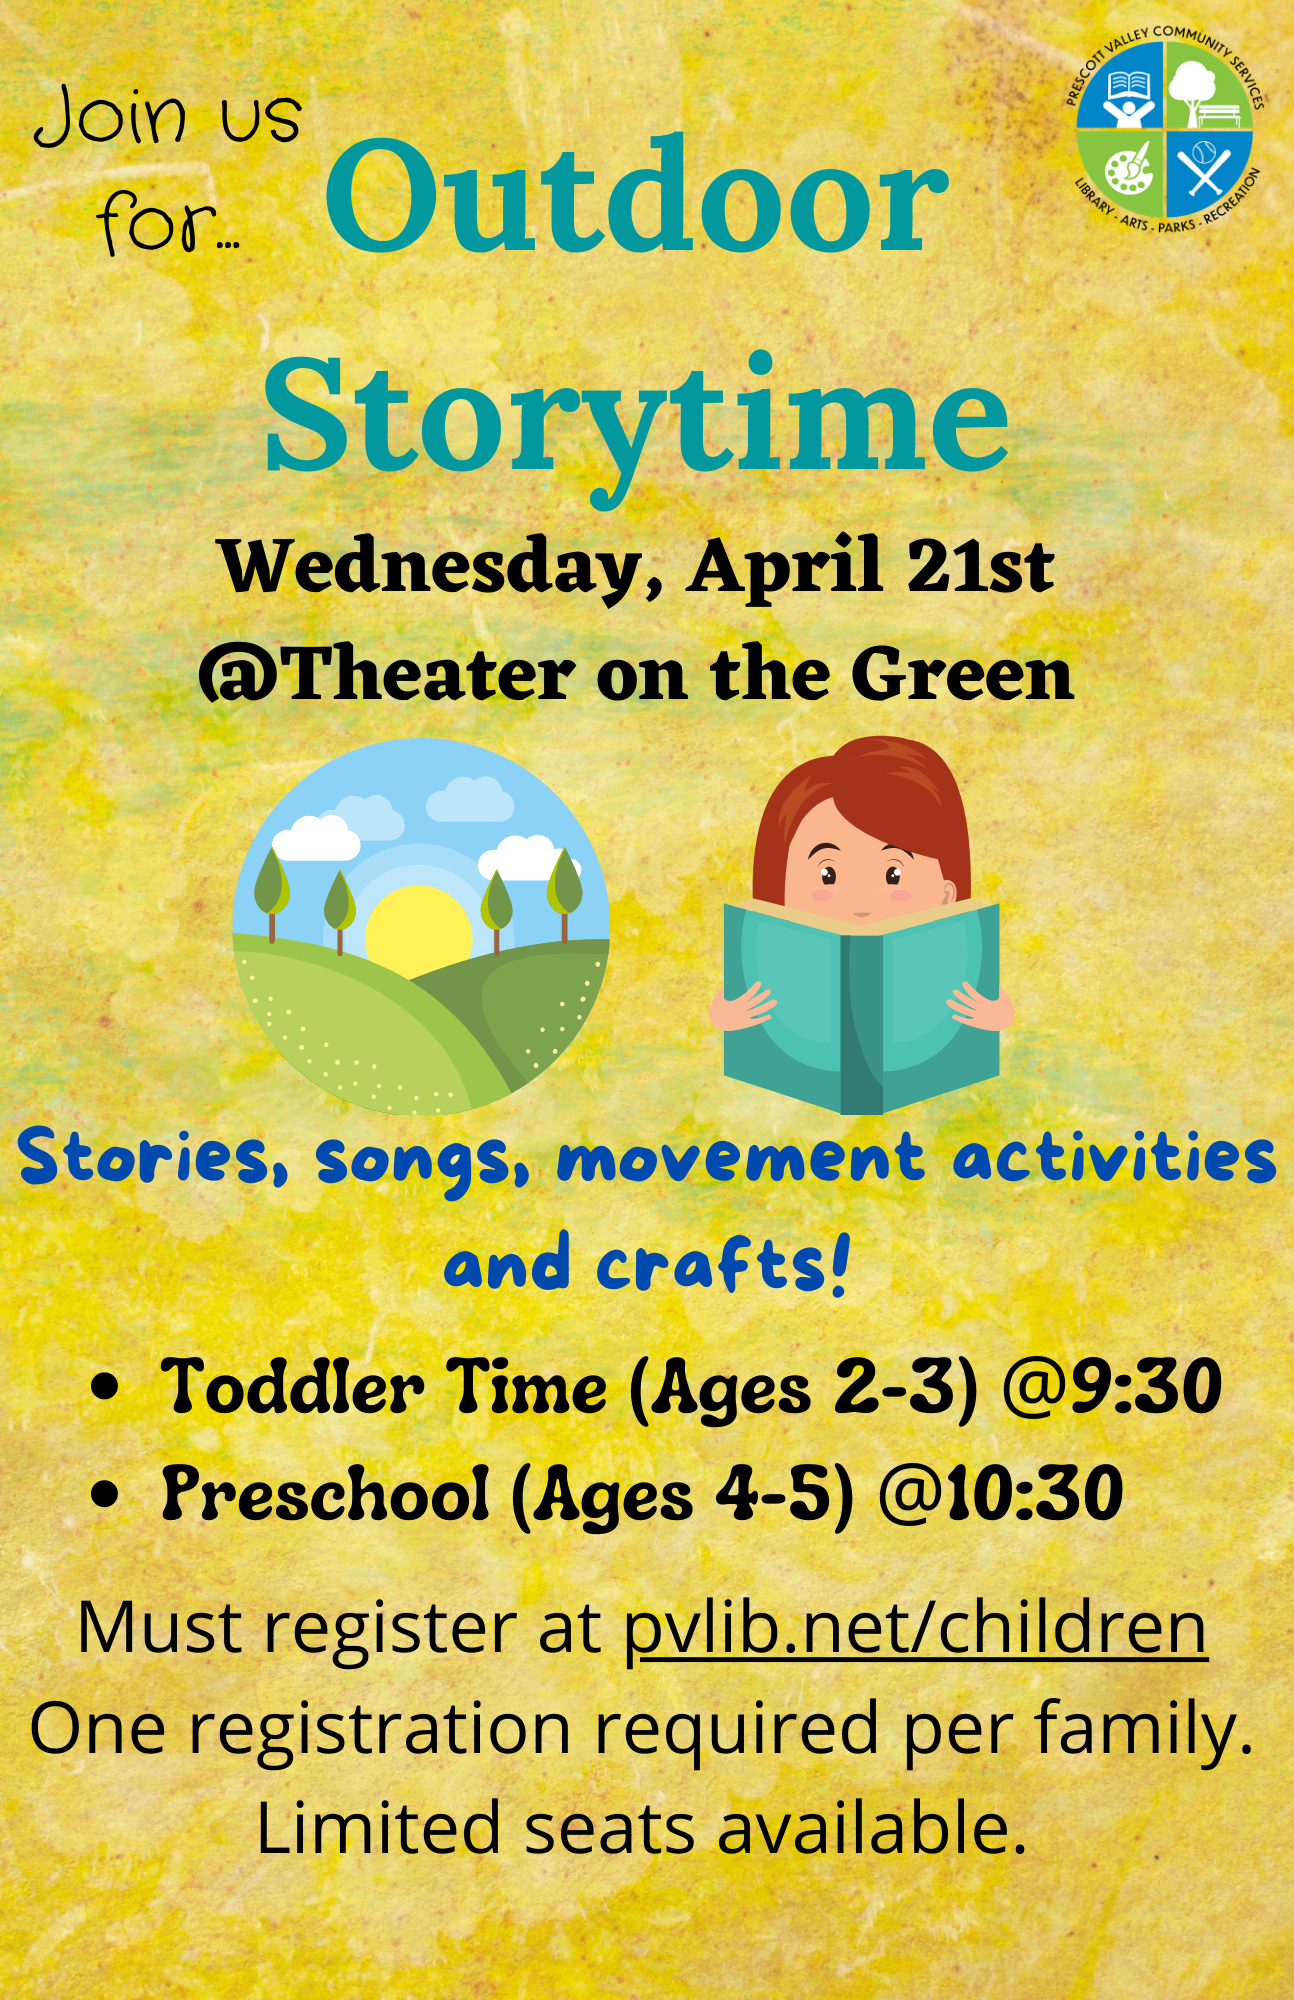 Toddler Time: meets at 9:30 on April 21 at the Theater on the Green